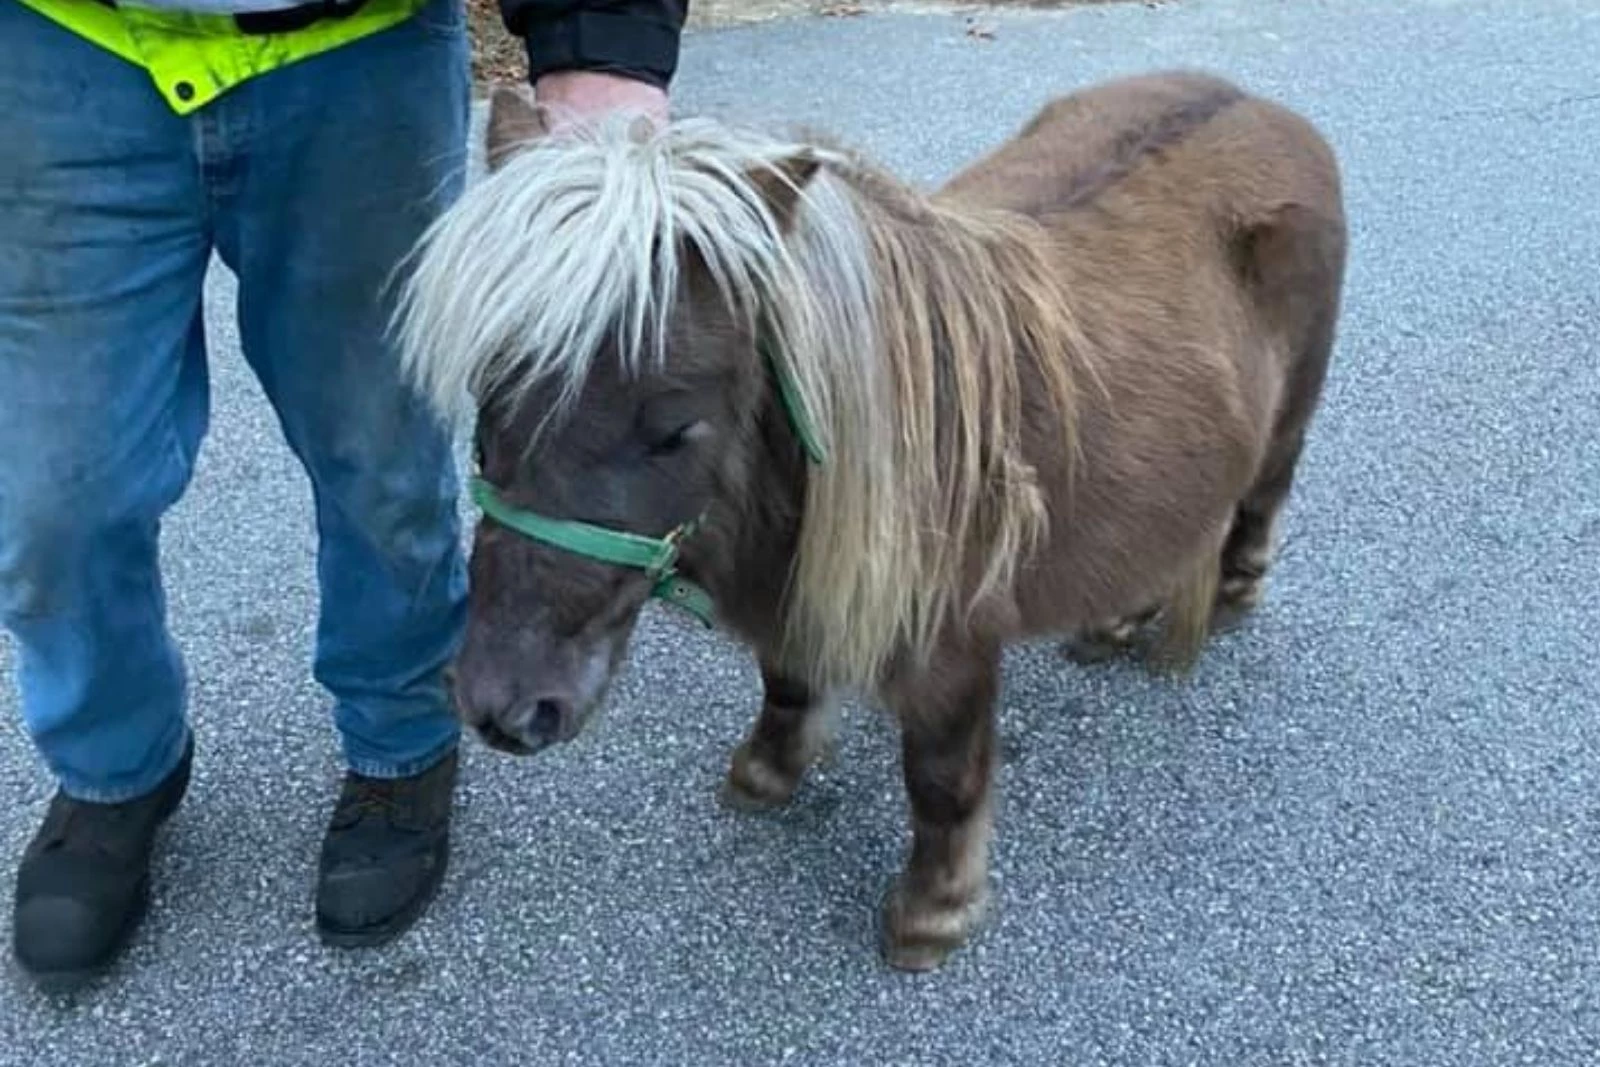 Adorable Miniature Horse Escapes and Has Himself a Day